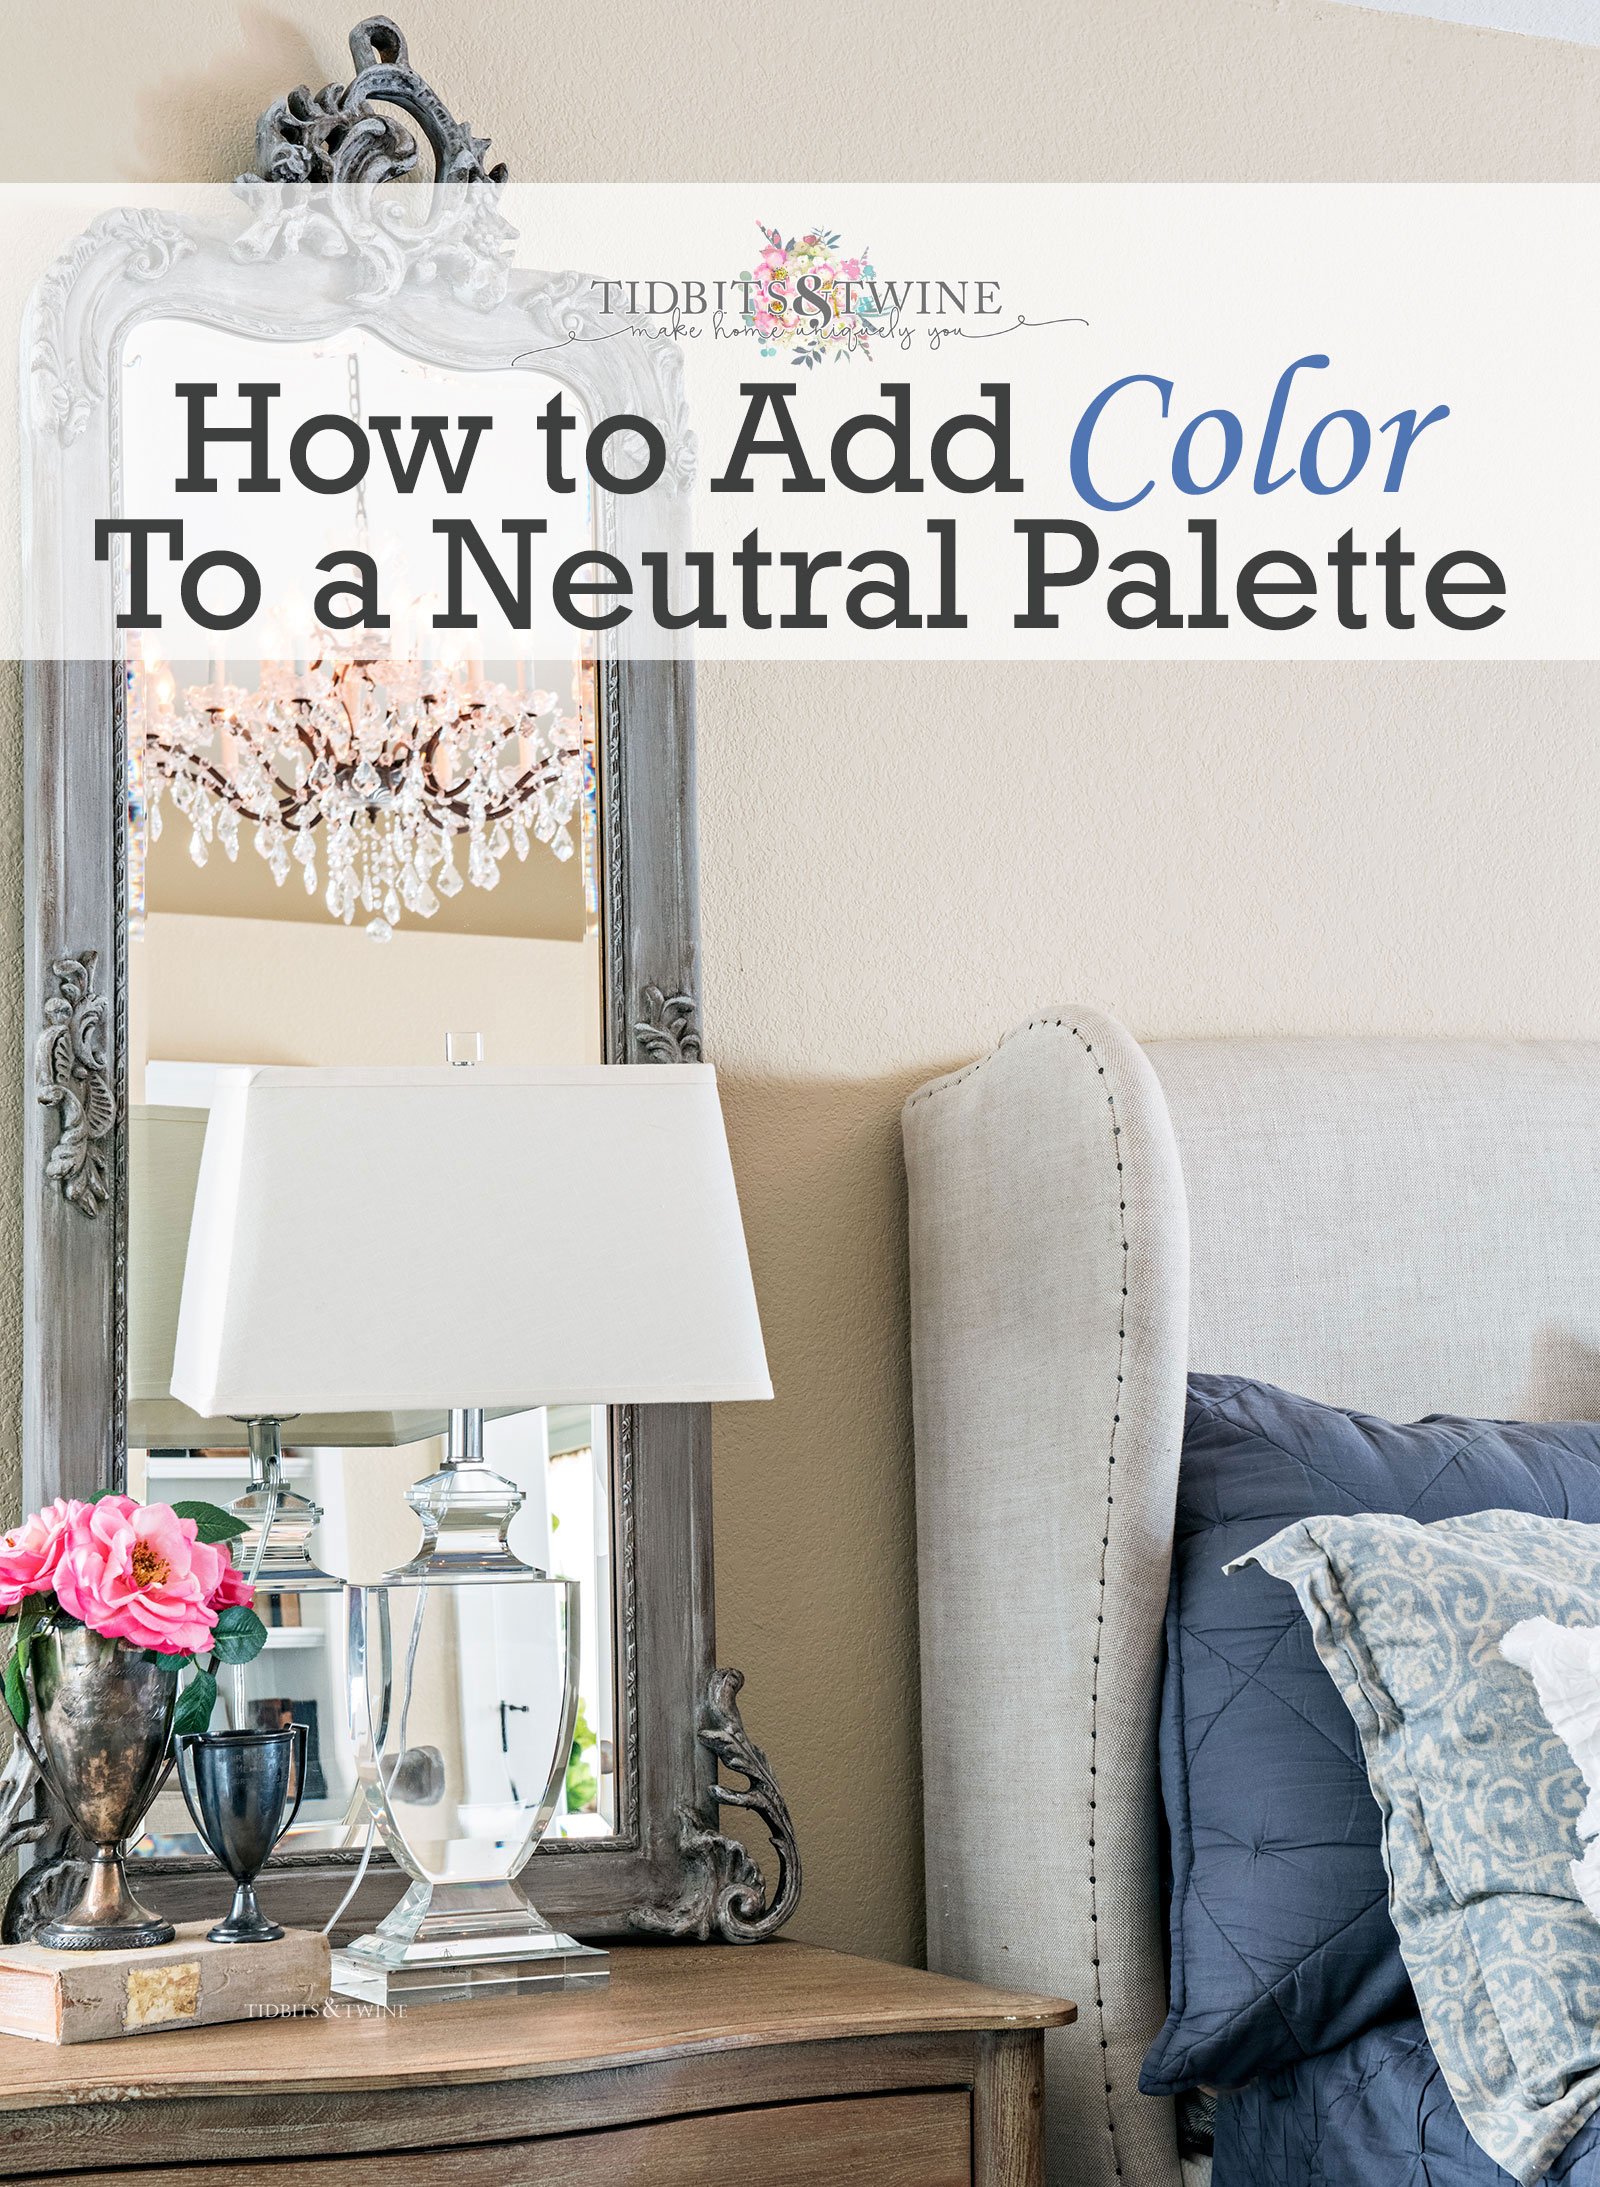 How to Add Color to a Neutral Palette